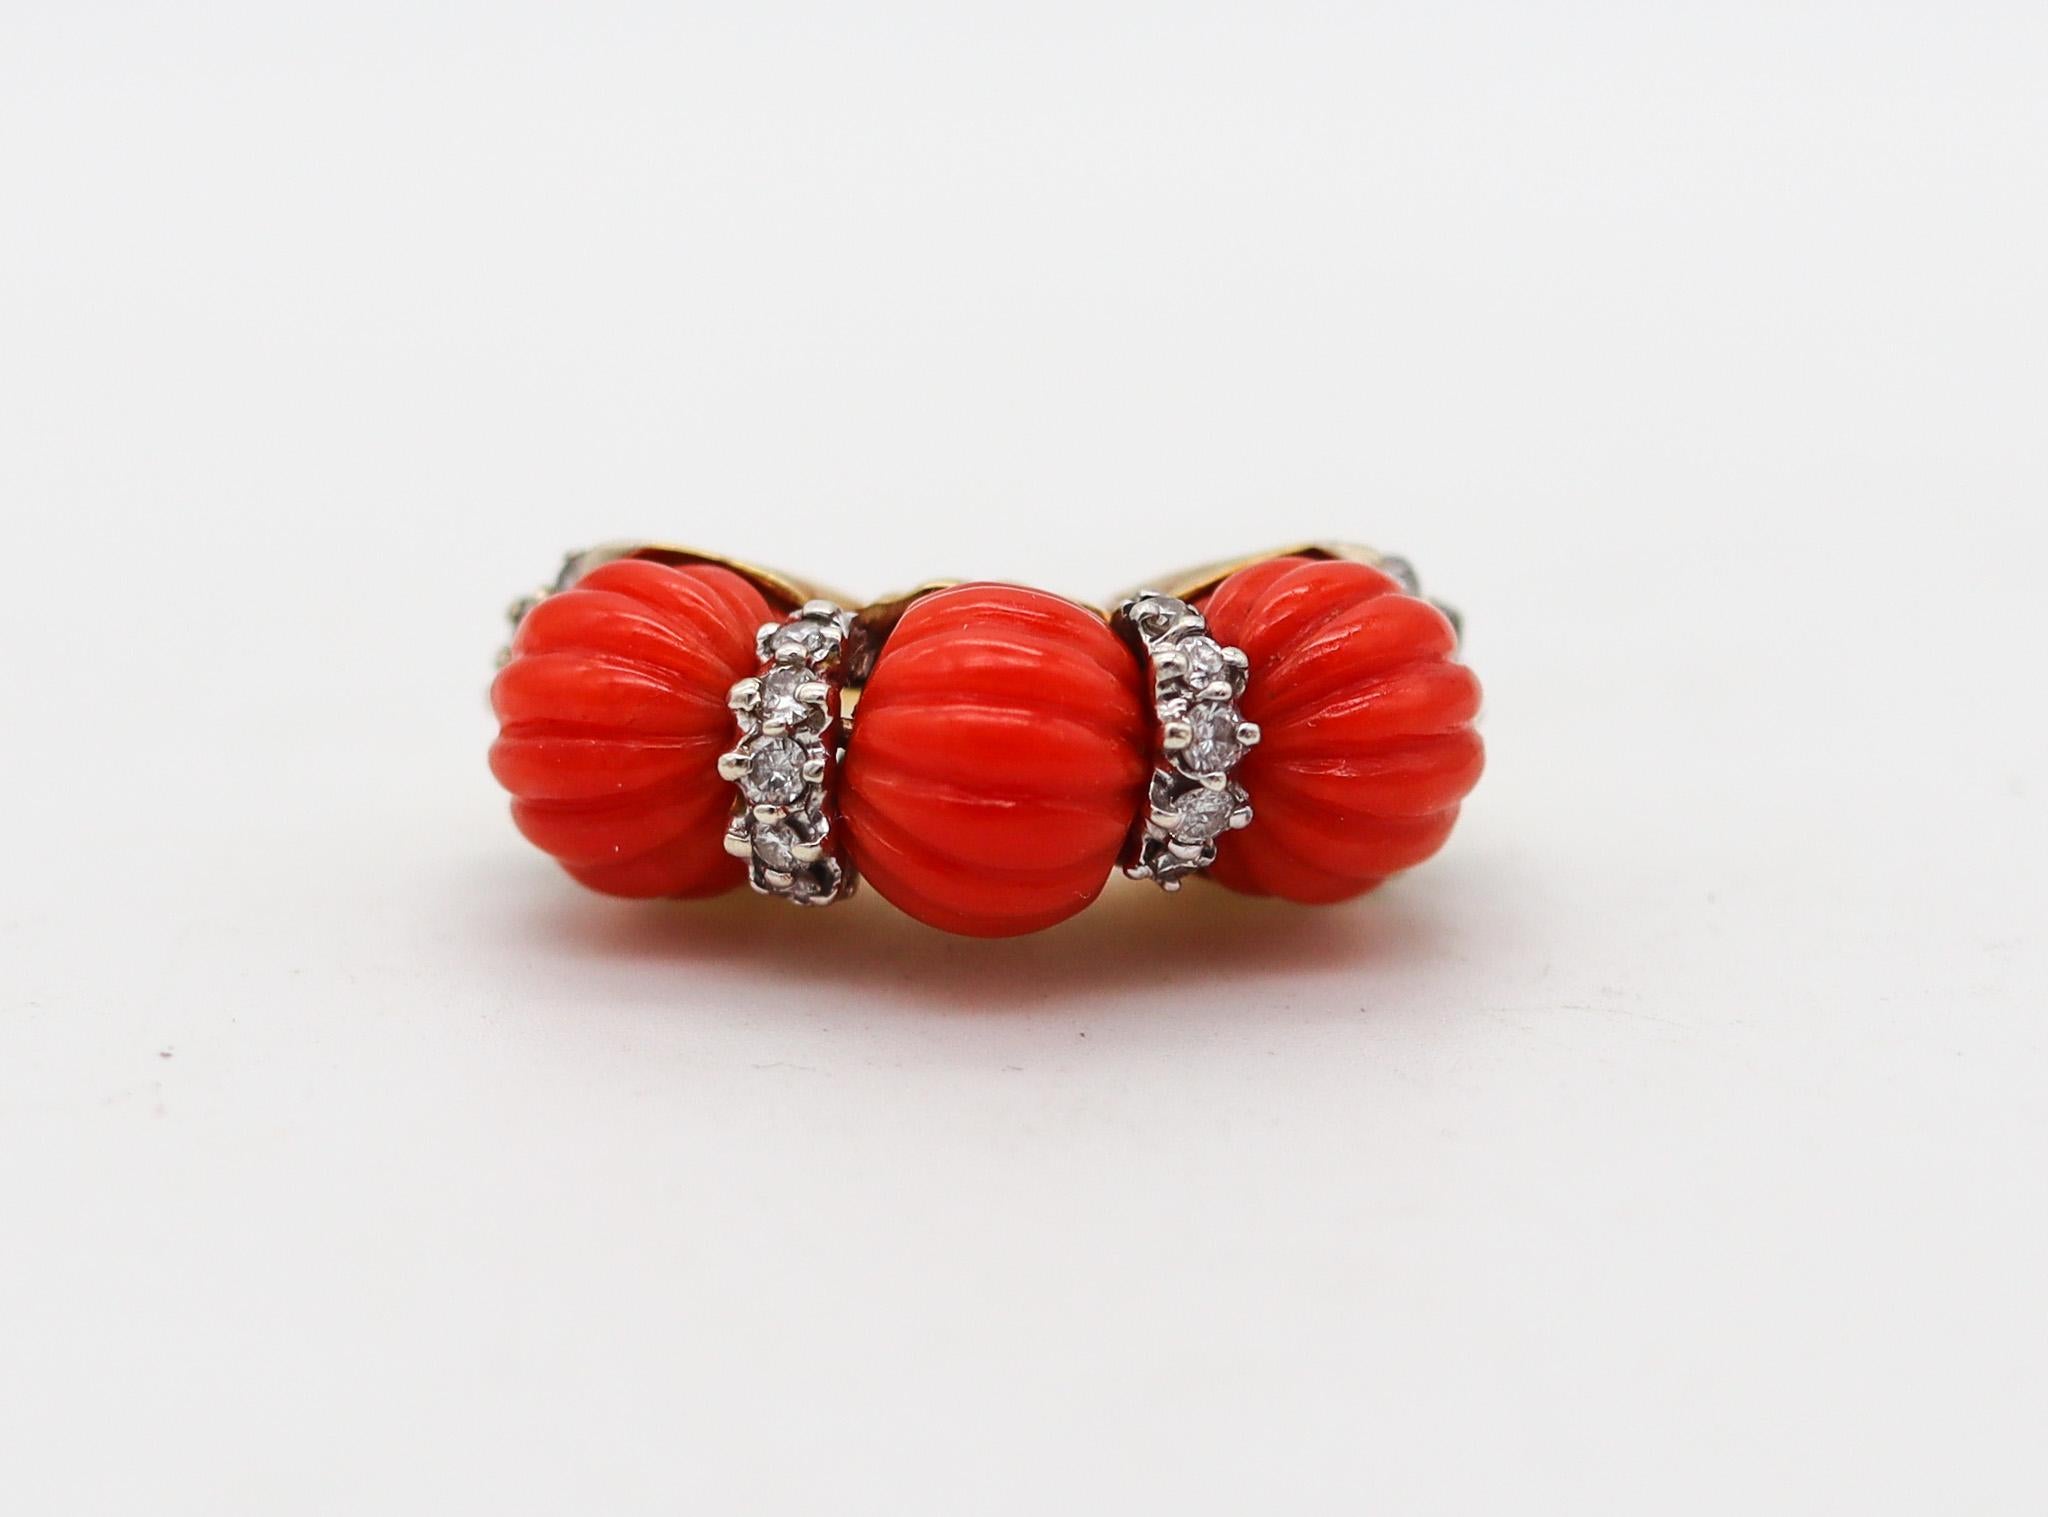 Neapolitan ring with red coral designed by Francesco Passaretta.

Gorgeous vintage piece made in the city of Napoles in Italy, at the jewelry atelier of Francesco Passaretta back in the 1970. This beautiful colorful ring has been crafted in solid